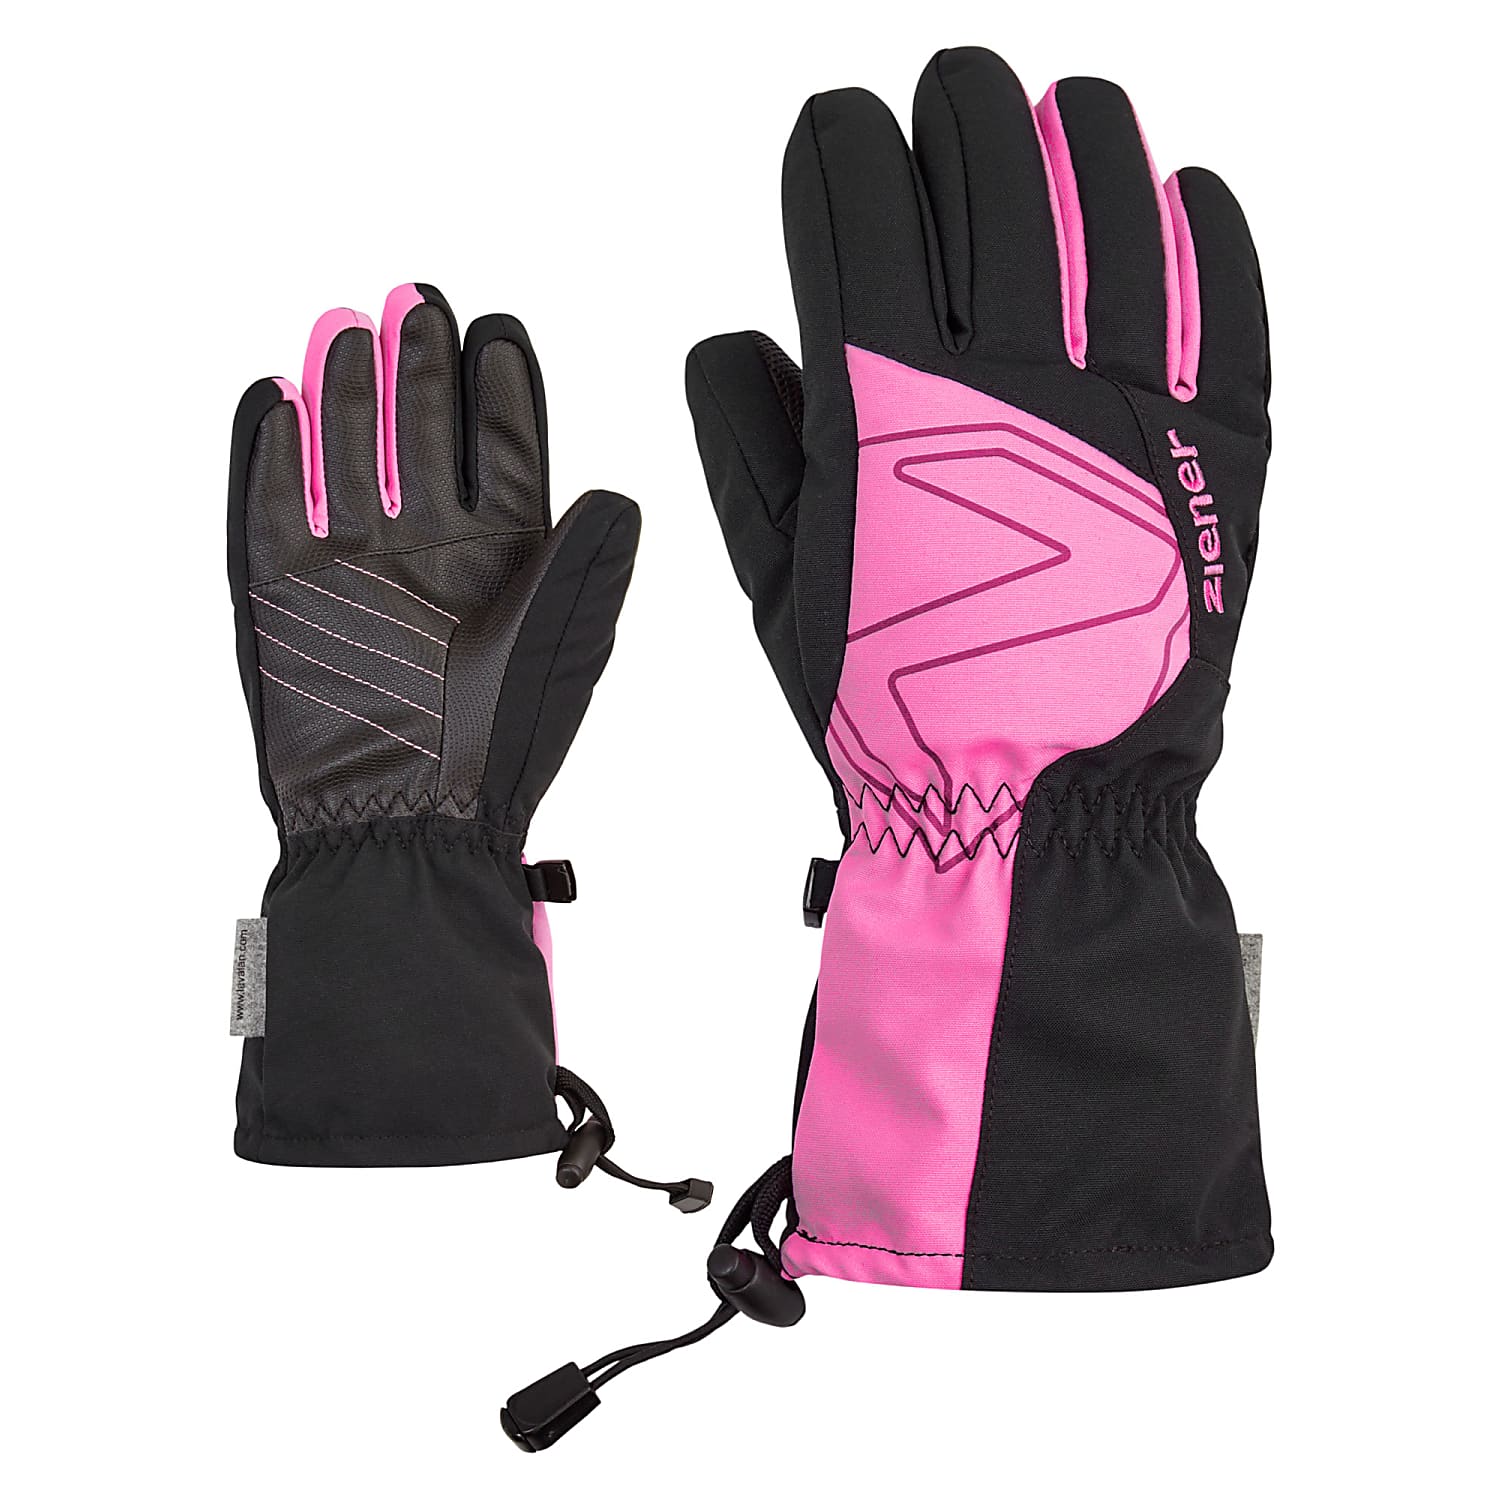 Pink AW Black - Fuchsia JUNIOR cheap and AS Fast - Ziener GLOVE, LAVAL shipping